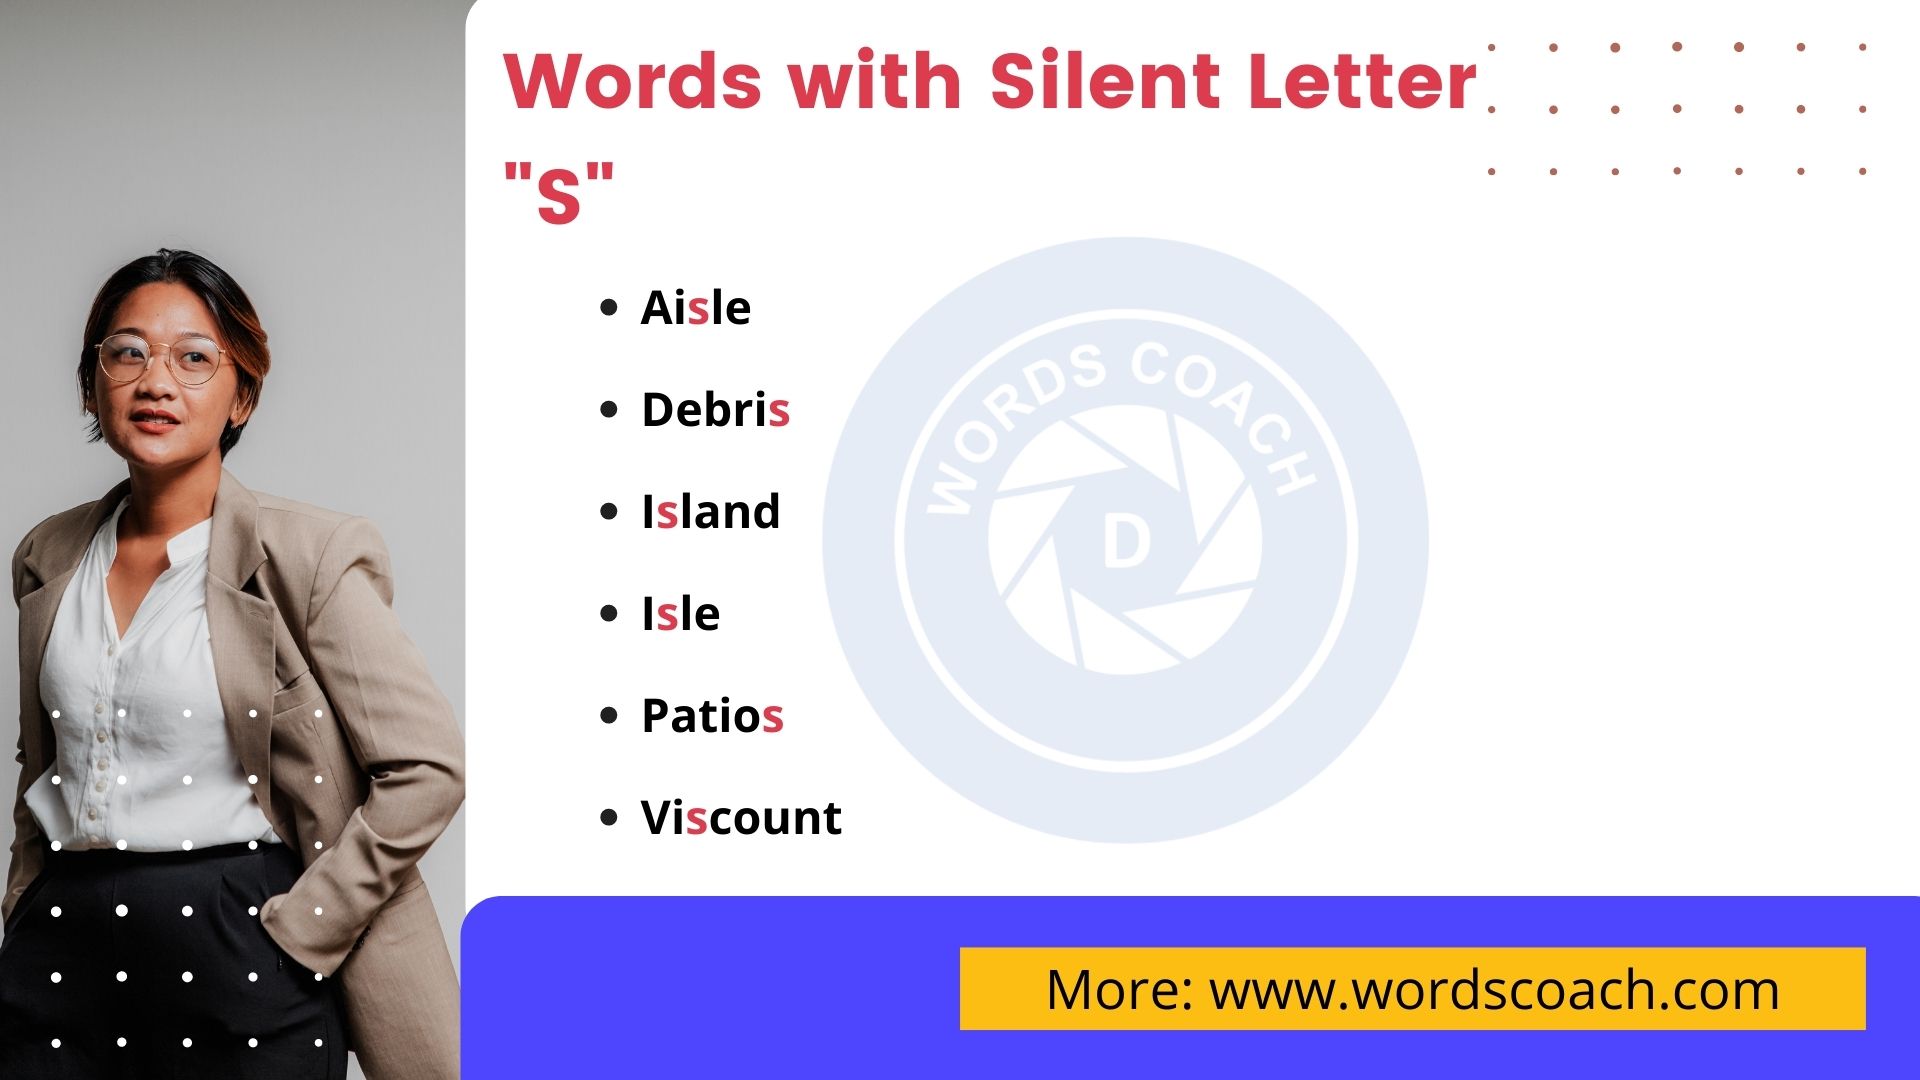 Words with Silent Letter S - wordscoach.com